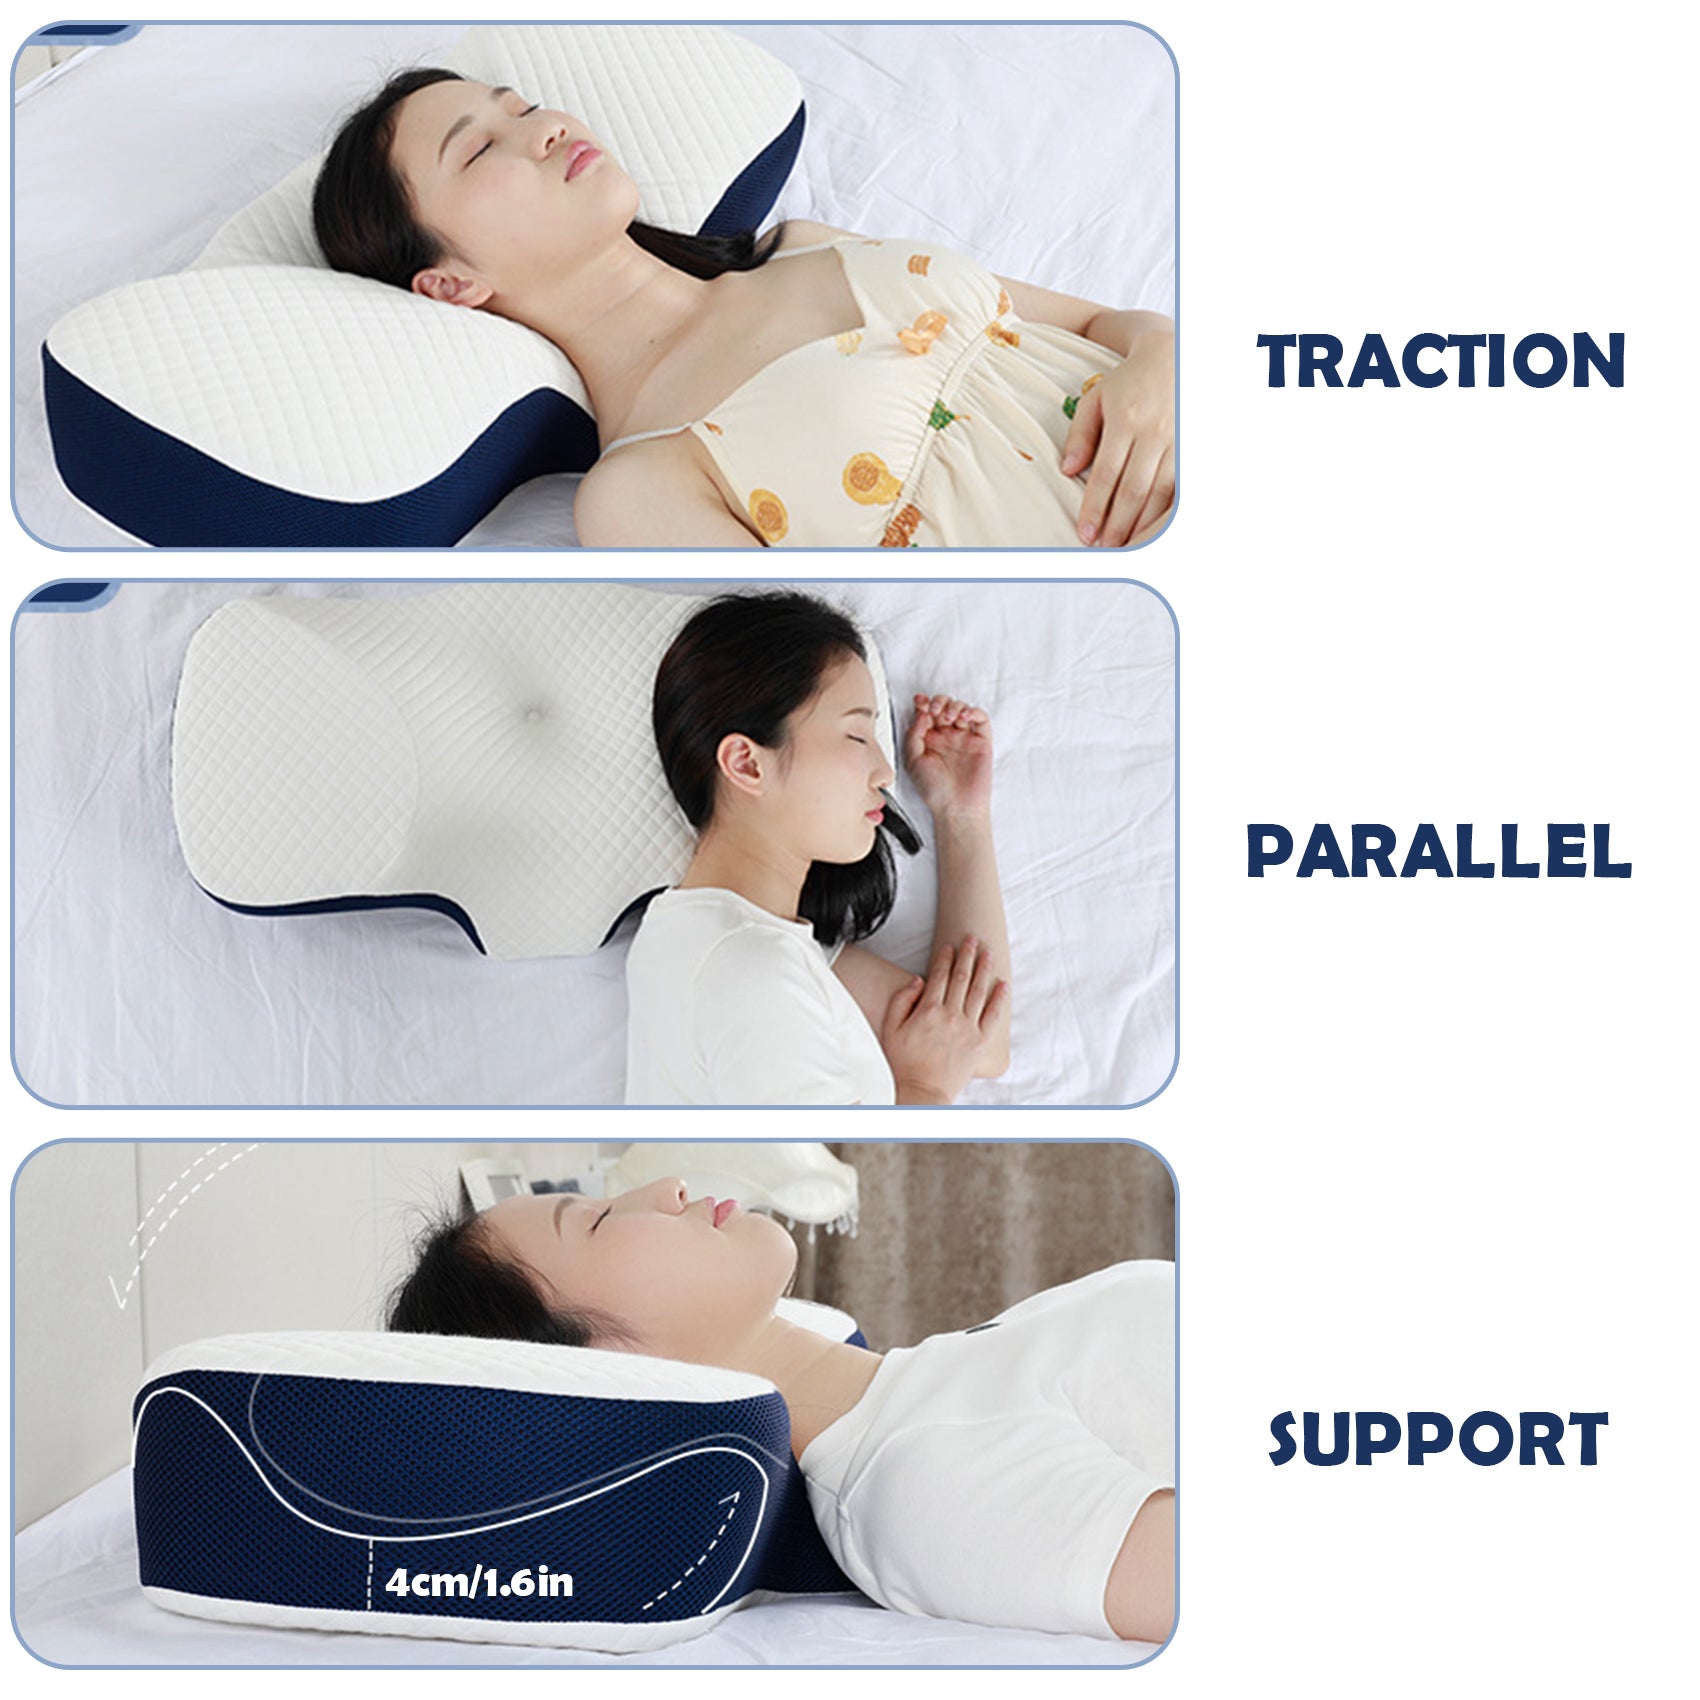 Suzicca Contour Memory Foam Pillow with Washable Silk-Pillowcase Orthopedic Ergonomic Cervical Sleeping Pillow for Neck Shoulder Pain for Side Back Stomach Sleepers